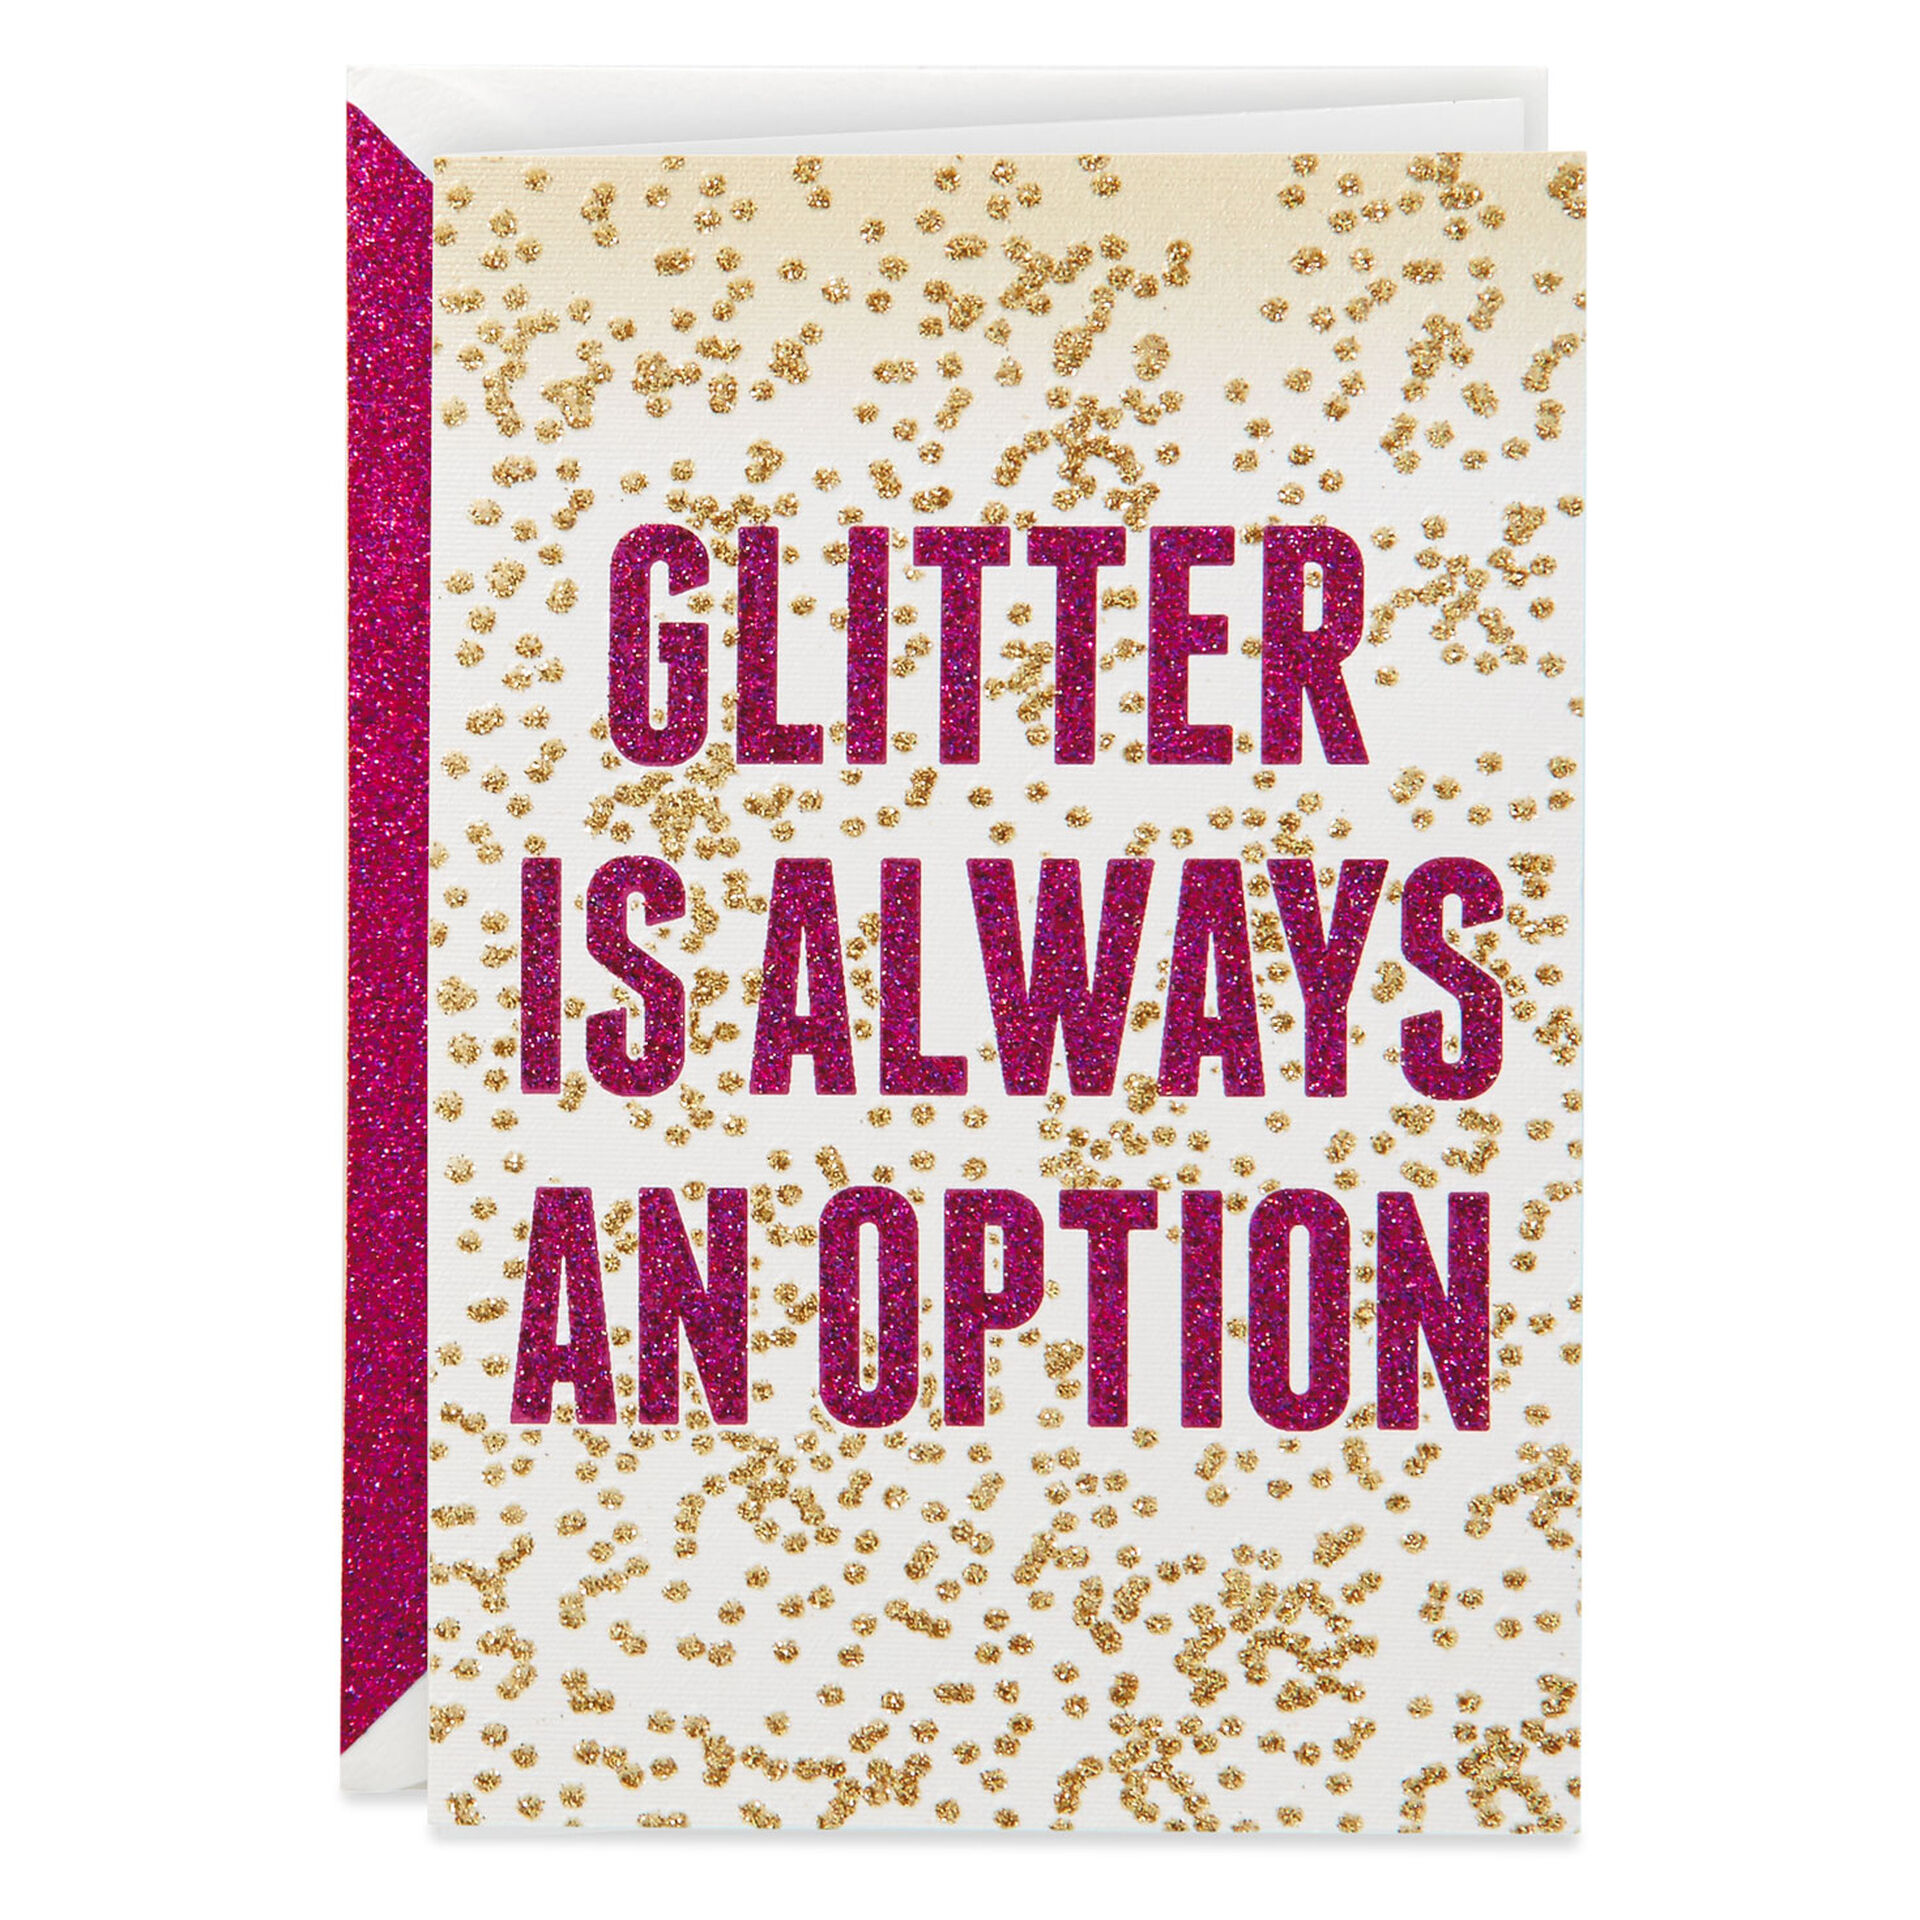 Pink-and-Gold-Glitter-Birthday-Card-for-Her_599LAD9132_01